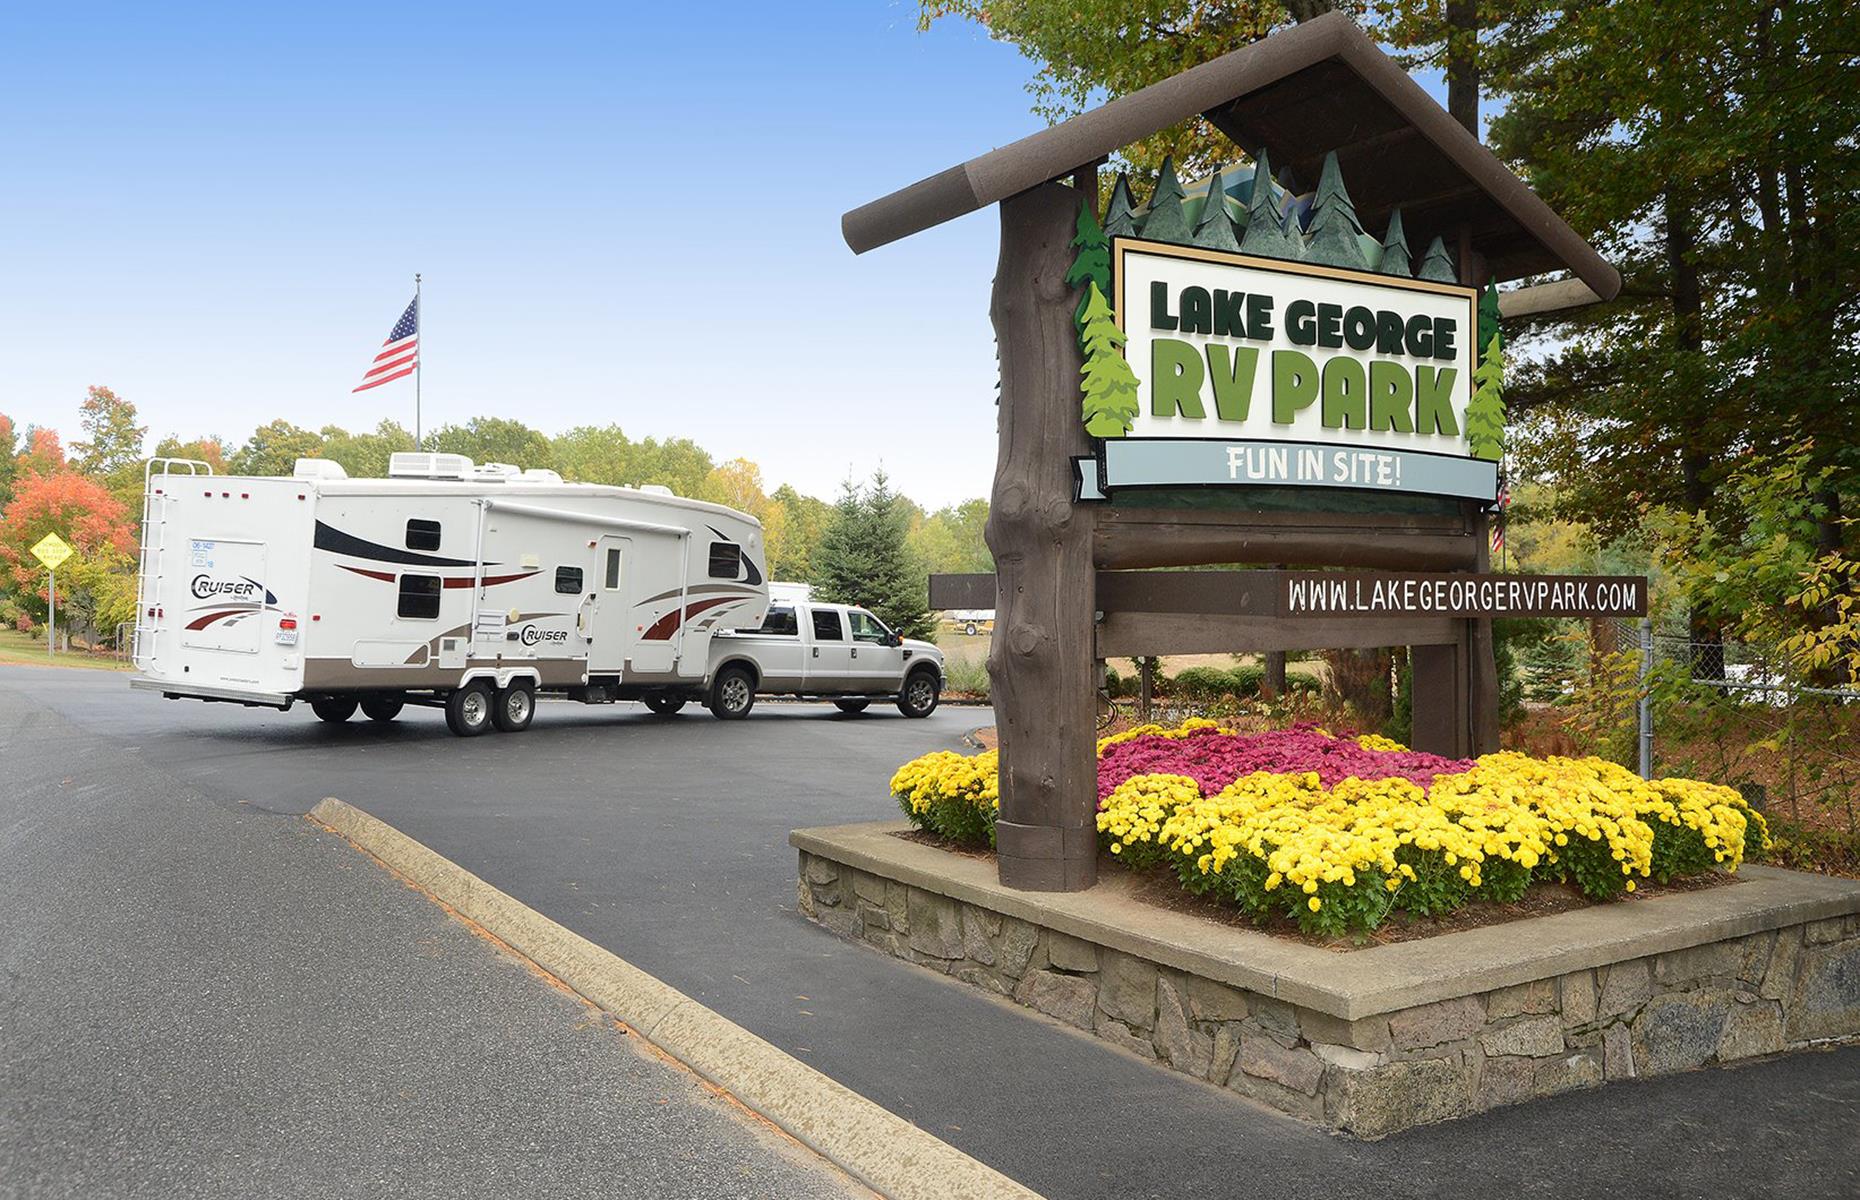 <p><a href="http://www.lakegeorgervpark.com/">Lake George</a>'s 120 acres are all about fun. Family-owned and operated by a clan of keen campers, the park is dotted with swimming pools and there's also a mini water park, Cascade Cove, right on site (<a href="https://www.lakegeorgervpark.com/guest-guide/schedule/">all are currently open</a>). The park's own well-kept biking and hiking trails ribbon out into the wider Lake George area, and the stunning French Mountain trail is a crowd-pleaser. Among the 400 scenic RV sites, there are back-in and pull-through options available, all with full hook-up. Check <a href="https://www.lakegeorgervpark.com/covid-19-cancellations/">here</a> for a list of amenities and events currently canceled due to COVID-19.</p>